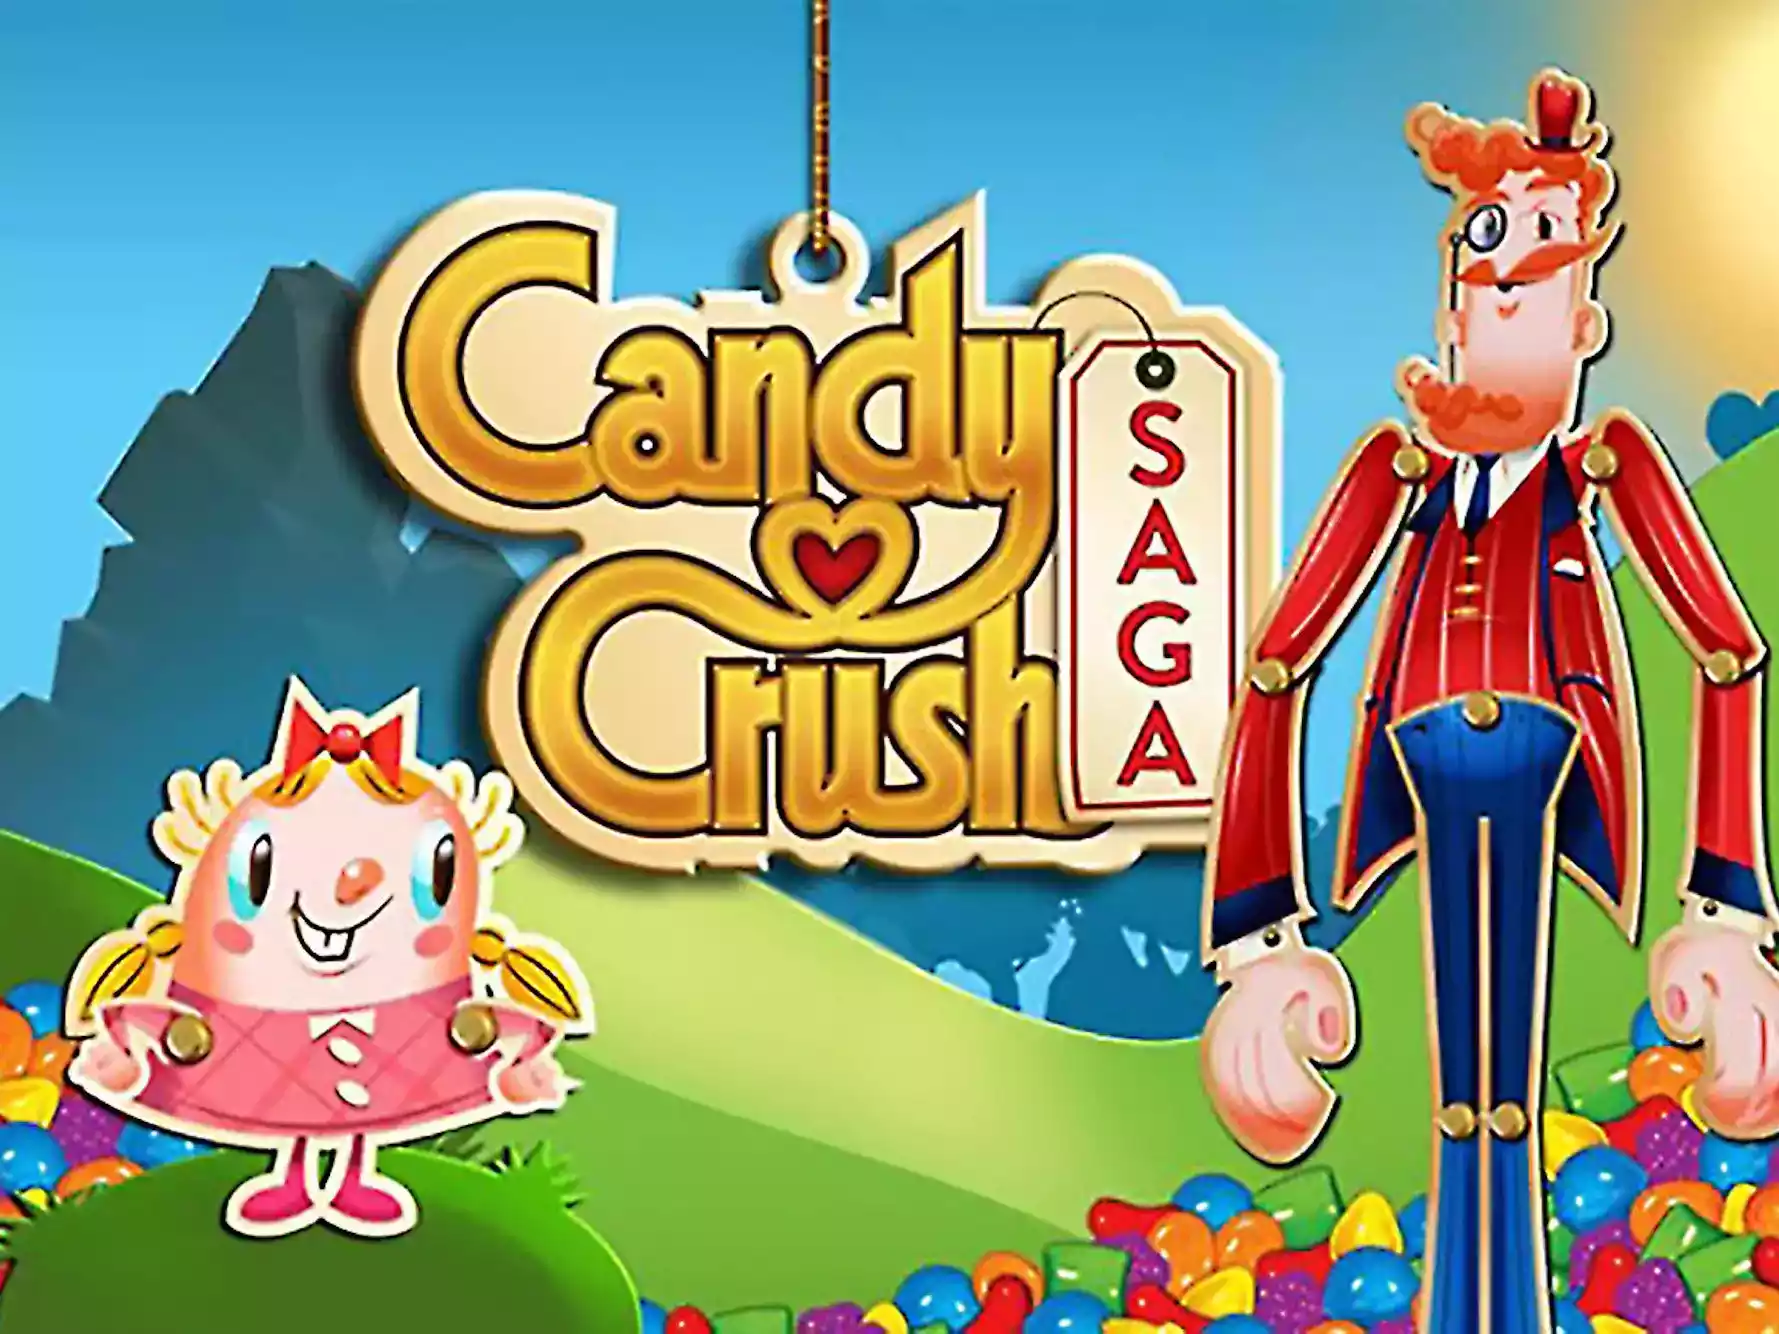 Play Candy Crush Saga Game Online for free